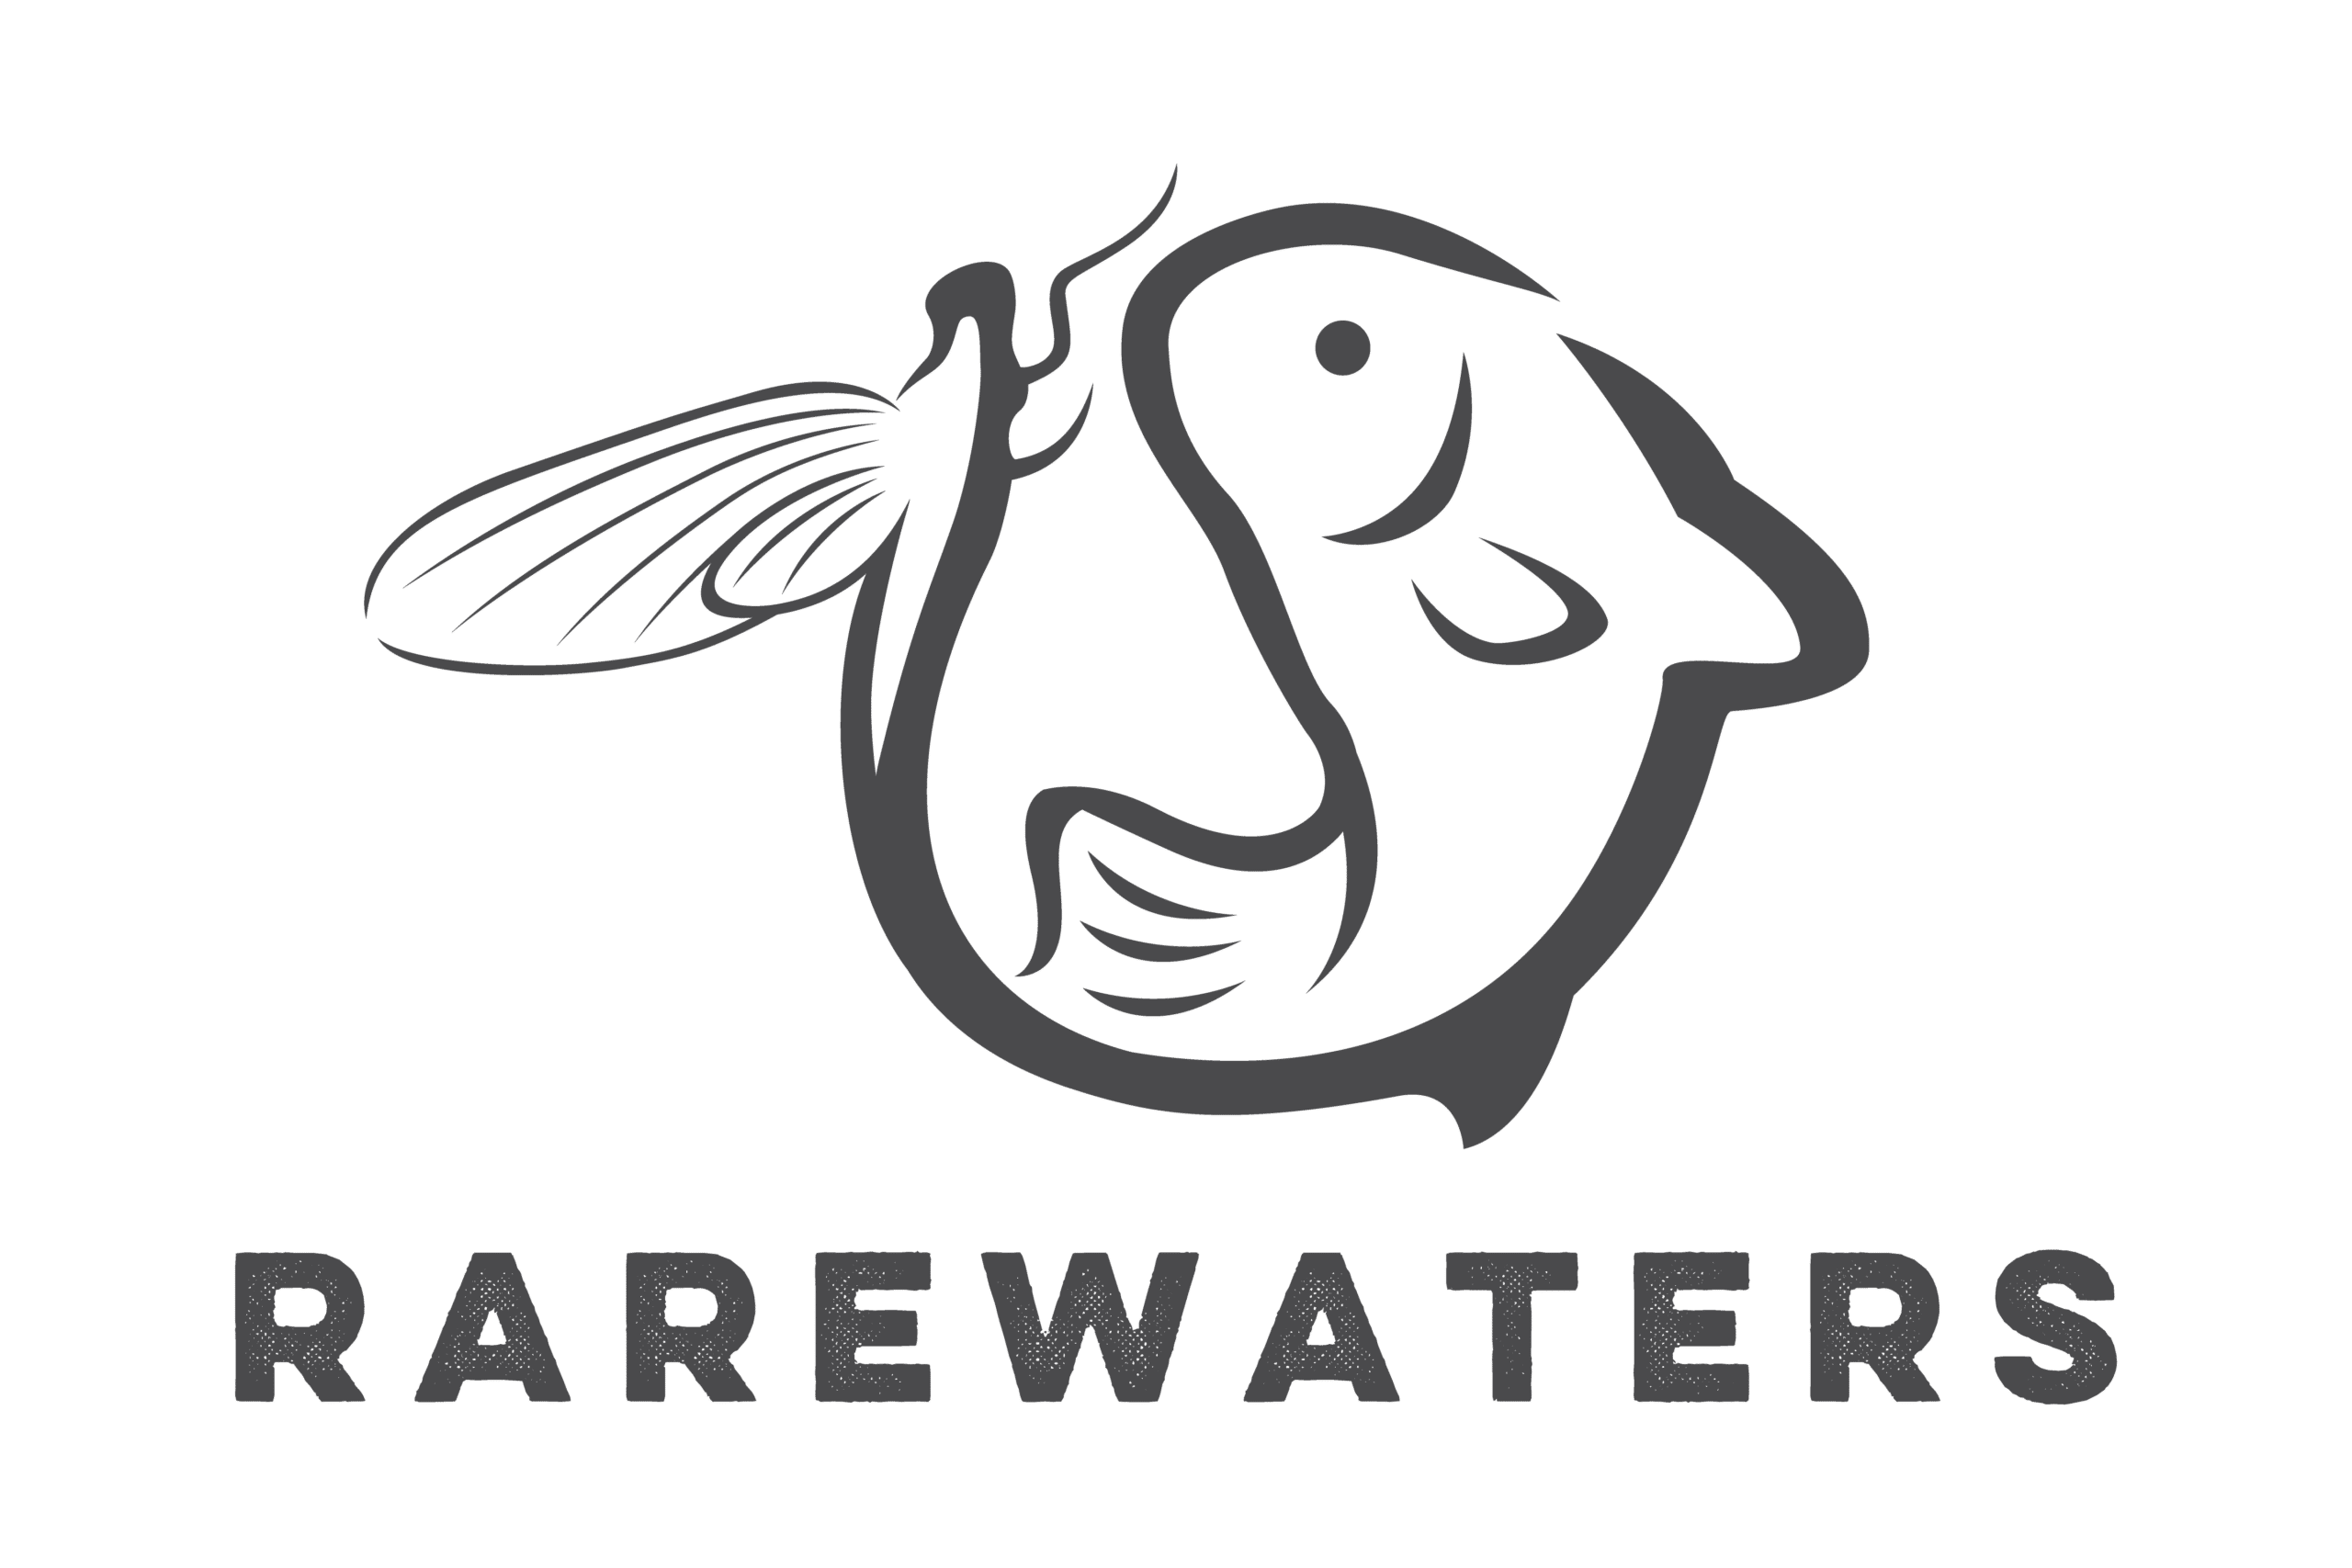 RareWaters – Best Private Fly Fishing Rivers, Lakes and Creeks for Trout, Rainbow Trout and Brown Trout Near Me